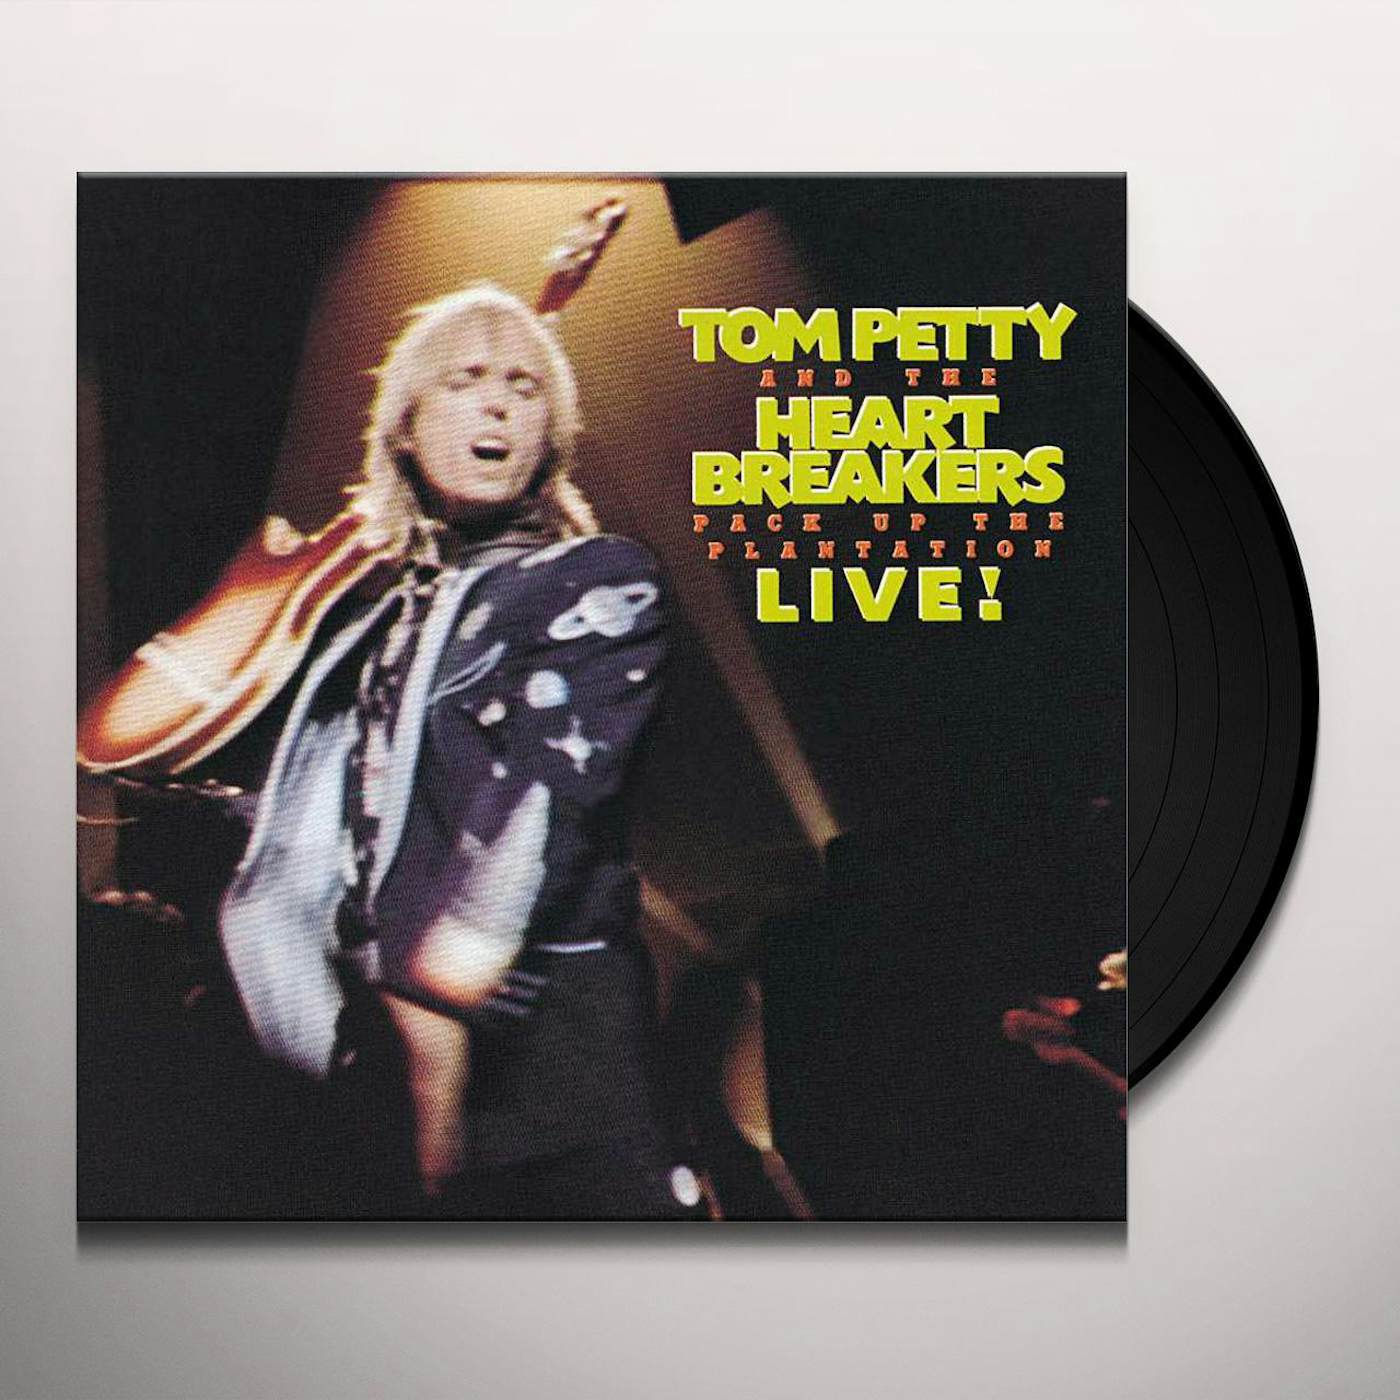 Tom Petty and the Heartbreakers PACK UP THE PLANTATION - LIVE Vinyl Record